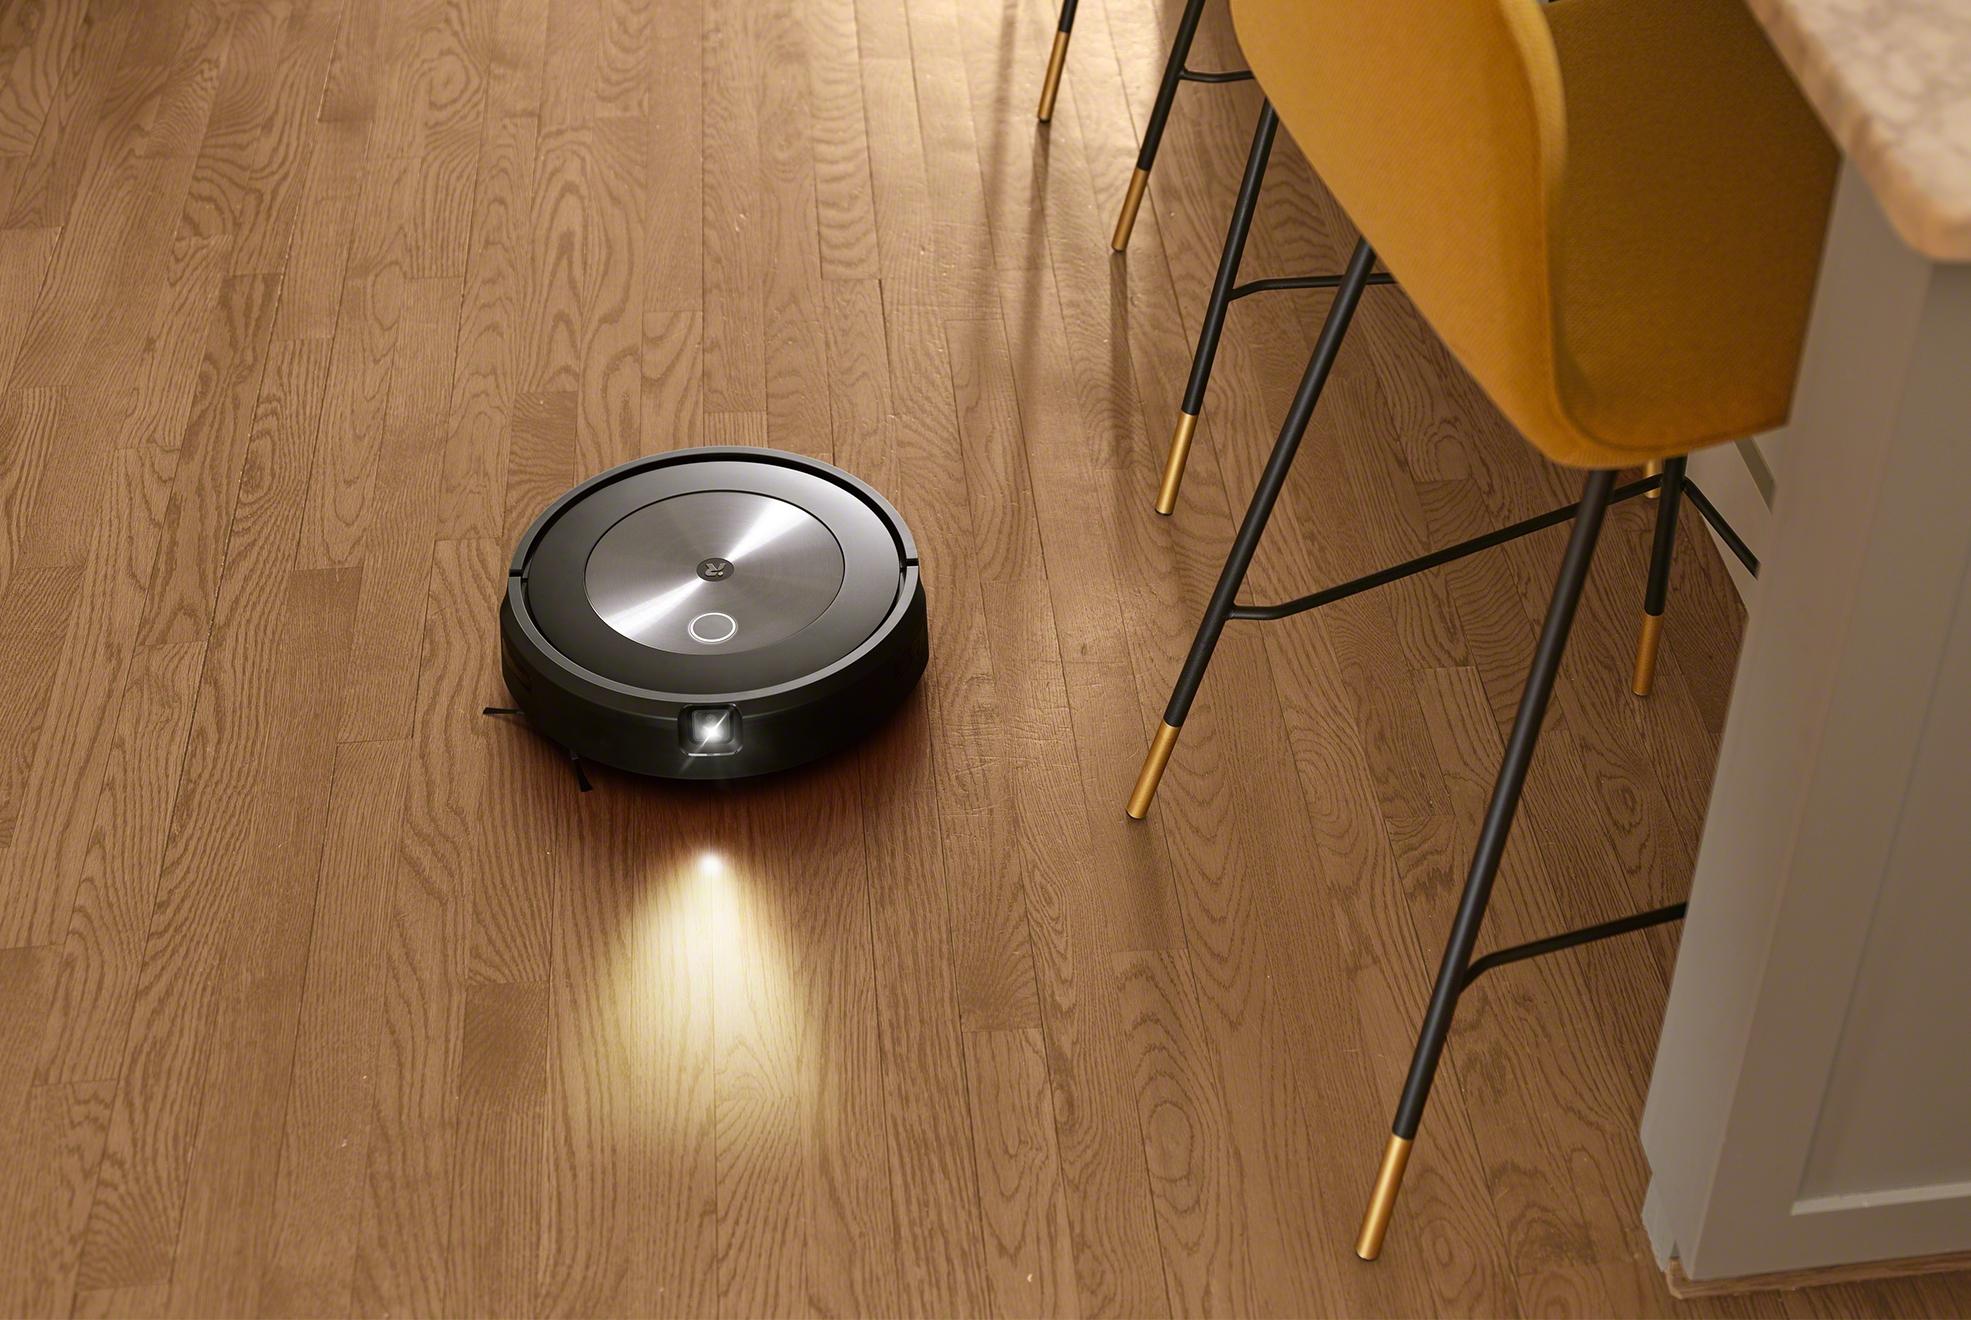 With New Roomba j7, iRobot Wants to Understand Our Homes